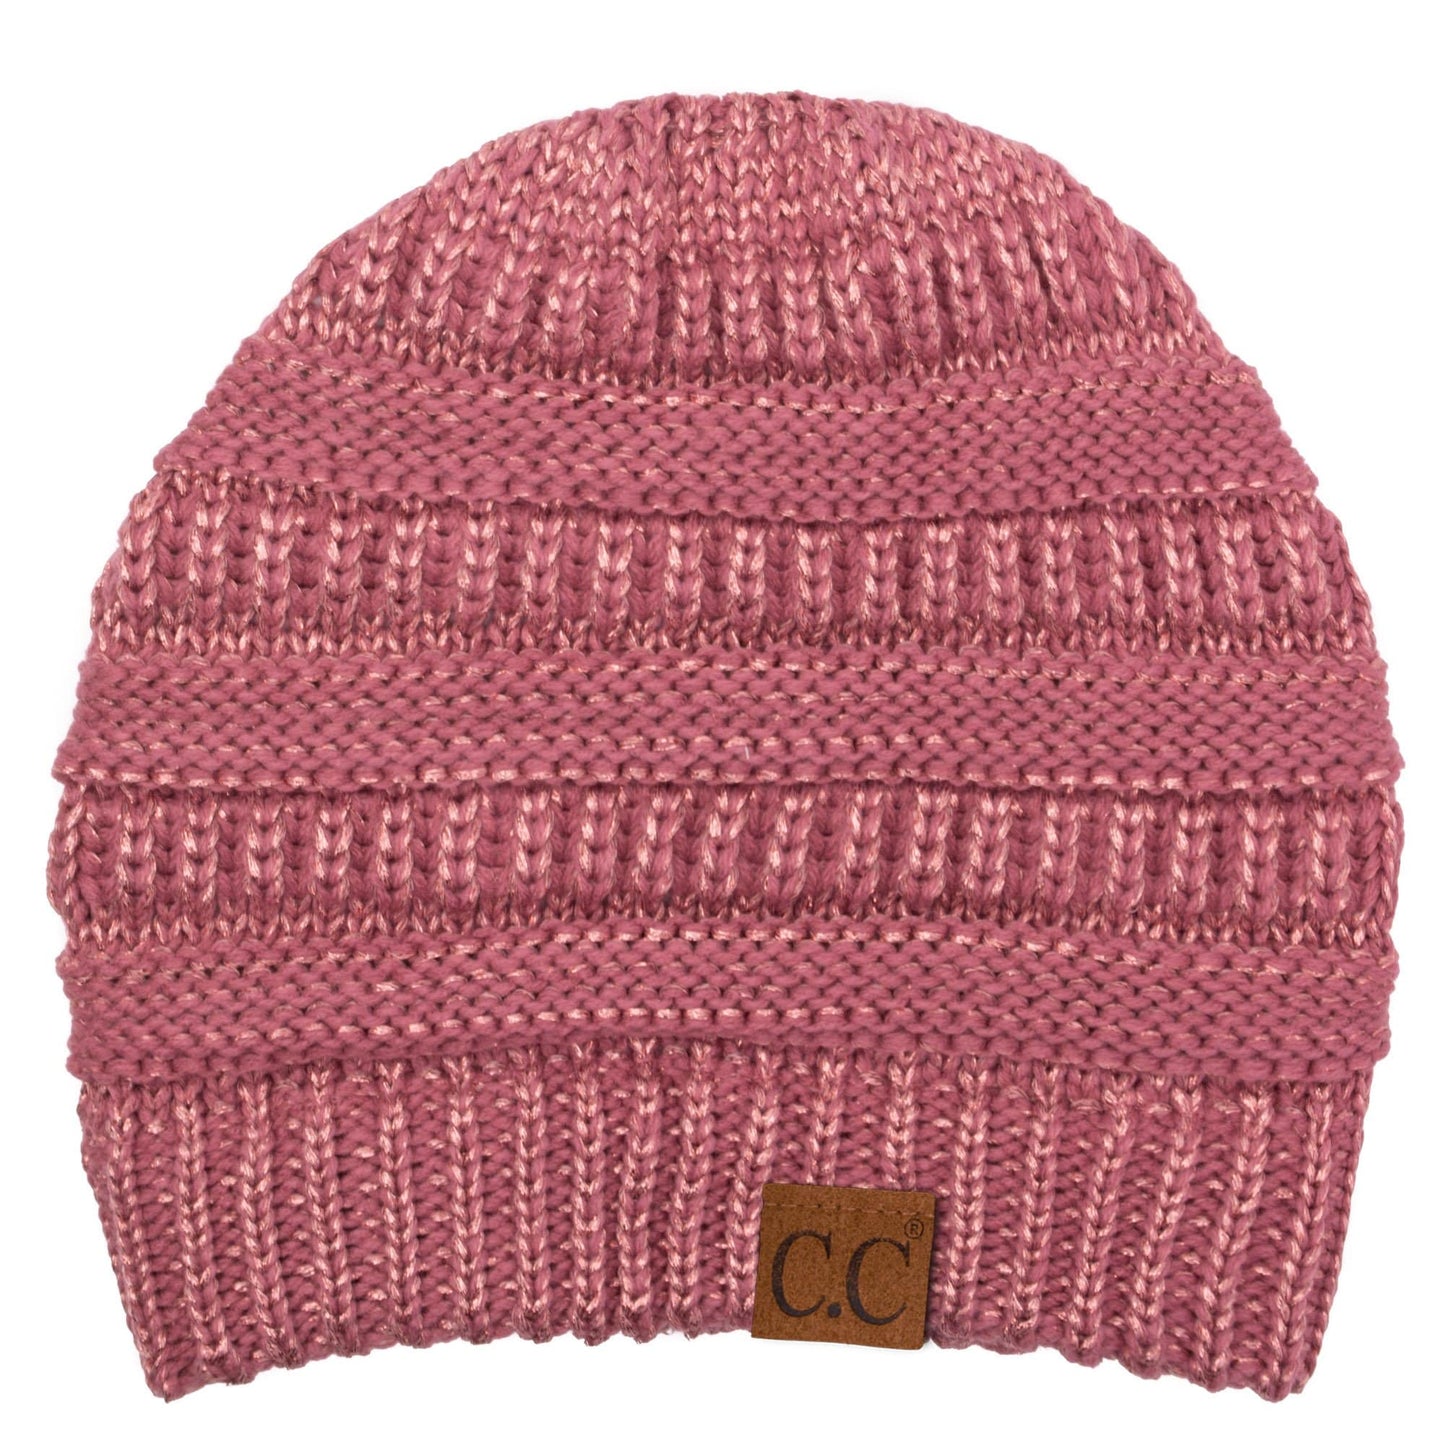 C.C Apparel Dusty Rose C.C Hat 20AM - Slouchy Thick Warm Cap Hat Skully Metallic Cable Knit Beanie